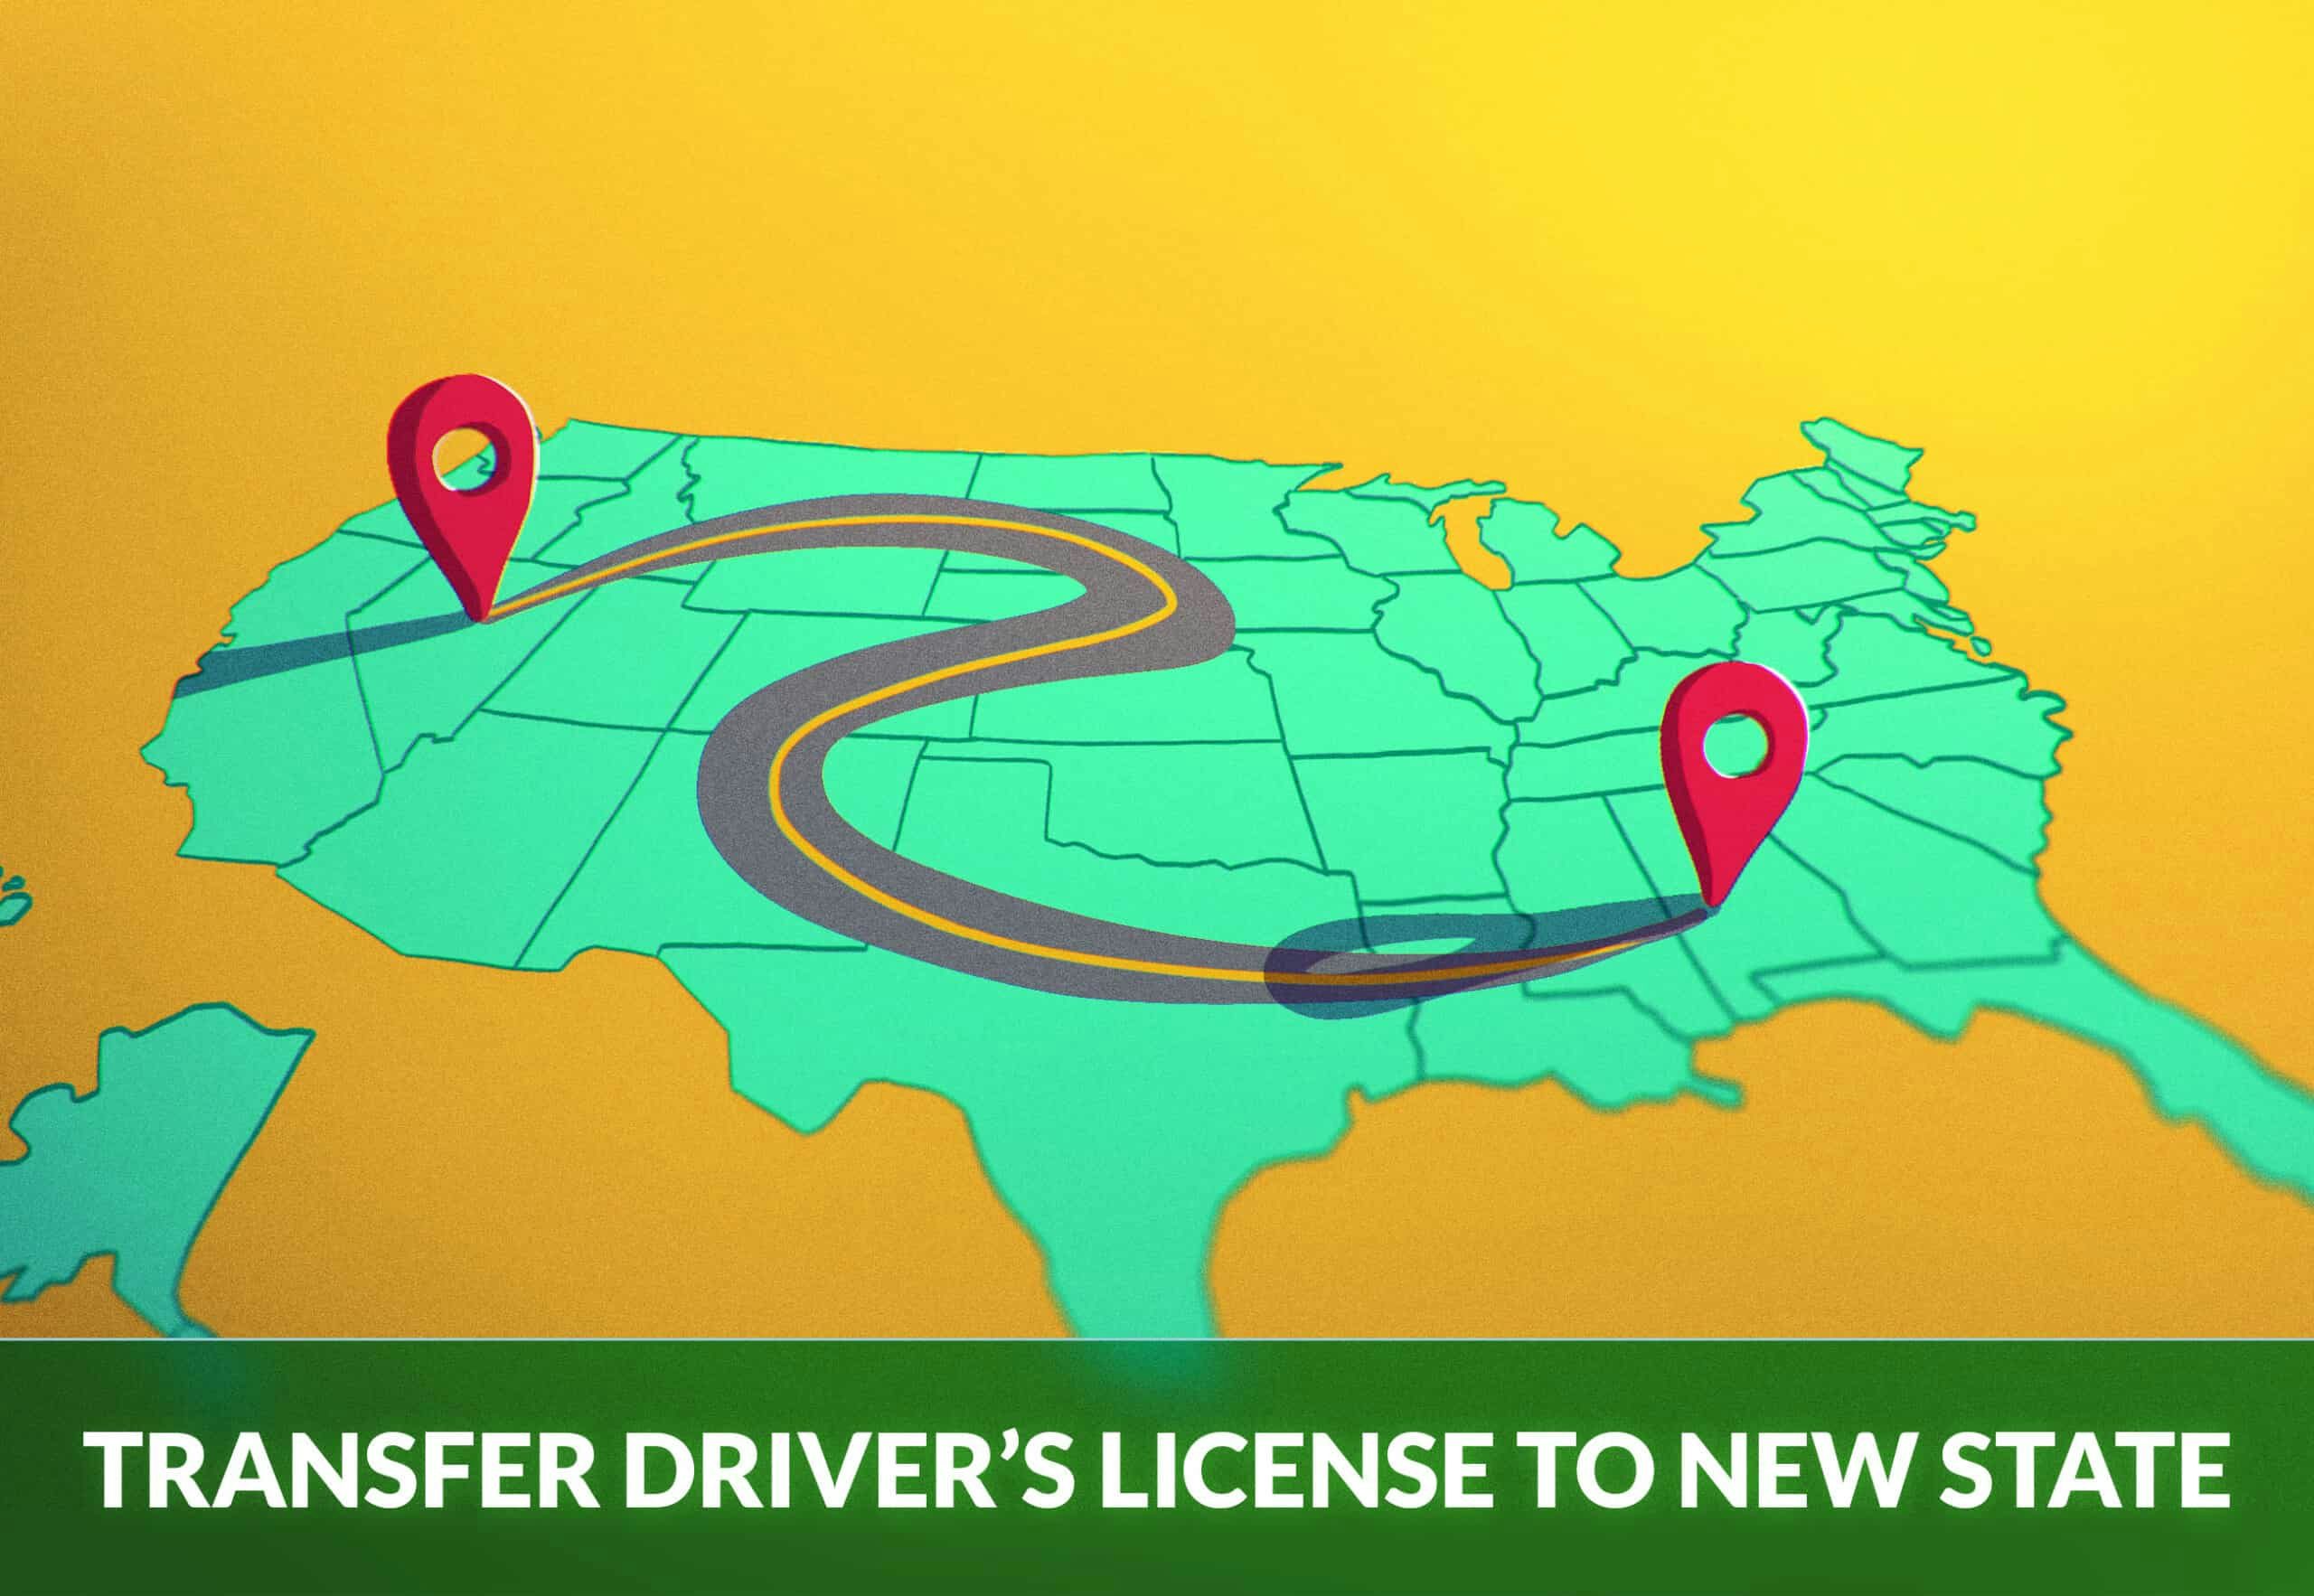 TRANSFER DRIVER’S LICENSE TO A NEW STATE